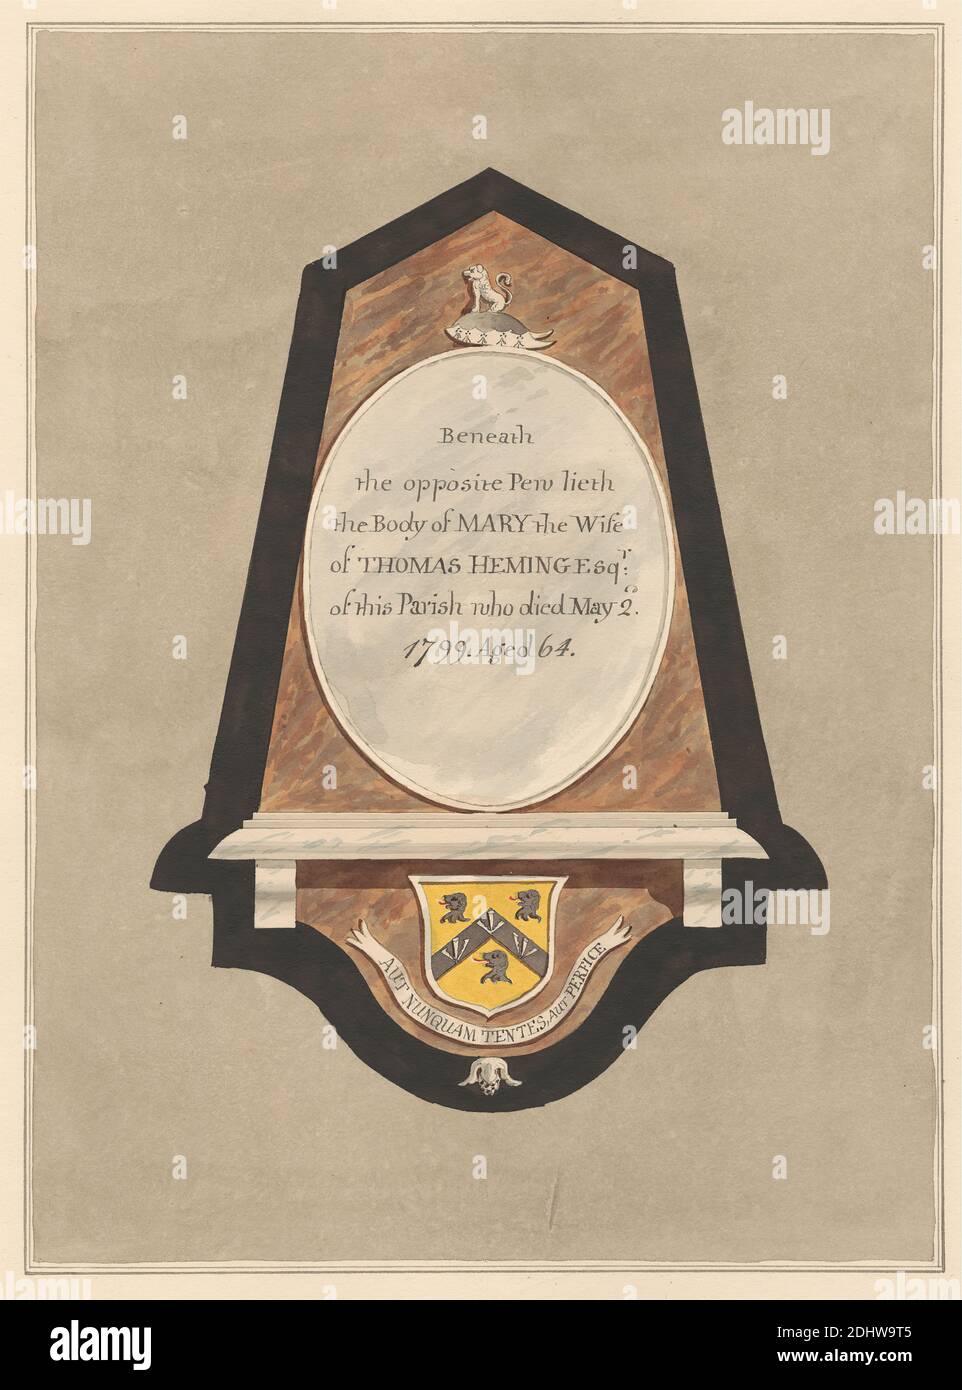 Memorial to Mary Heming from Hillingdon Church, Daniel Lysons, 1762–1834, British, between 1796 and 1811, Pen and black ink, watercolor and gouache over graphite on medium, slightly textured, cream wove paper, Sheet: 14 3/4 × 10 5/8 inches (37.5 × 27 cm), architectural subject, church, memorial, Church of St John the Baptist, England, Greater London, Hillingdon, London, United Kingdom Stock Photo